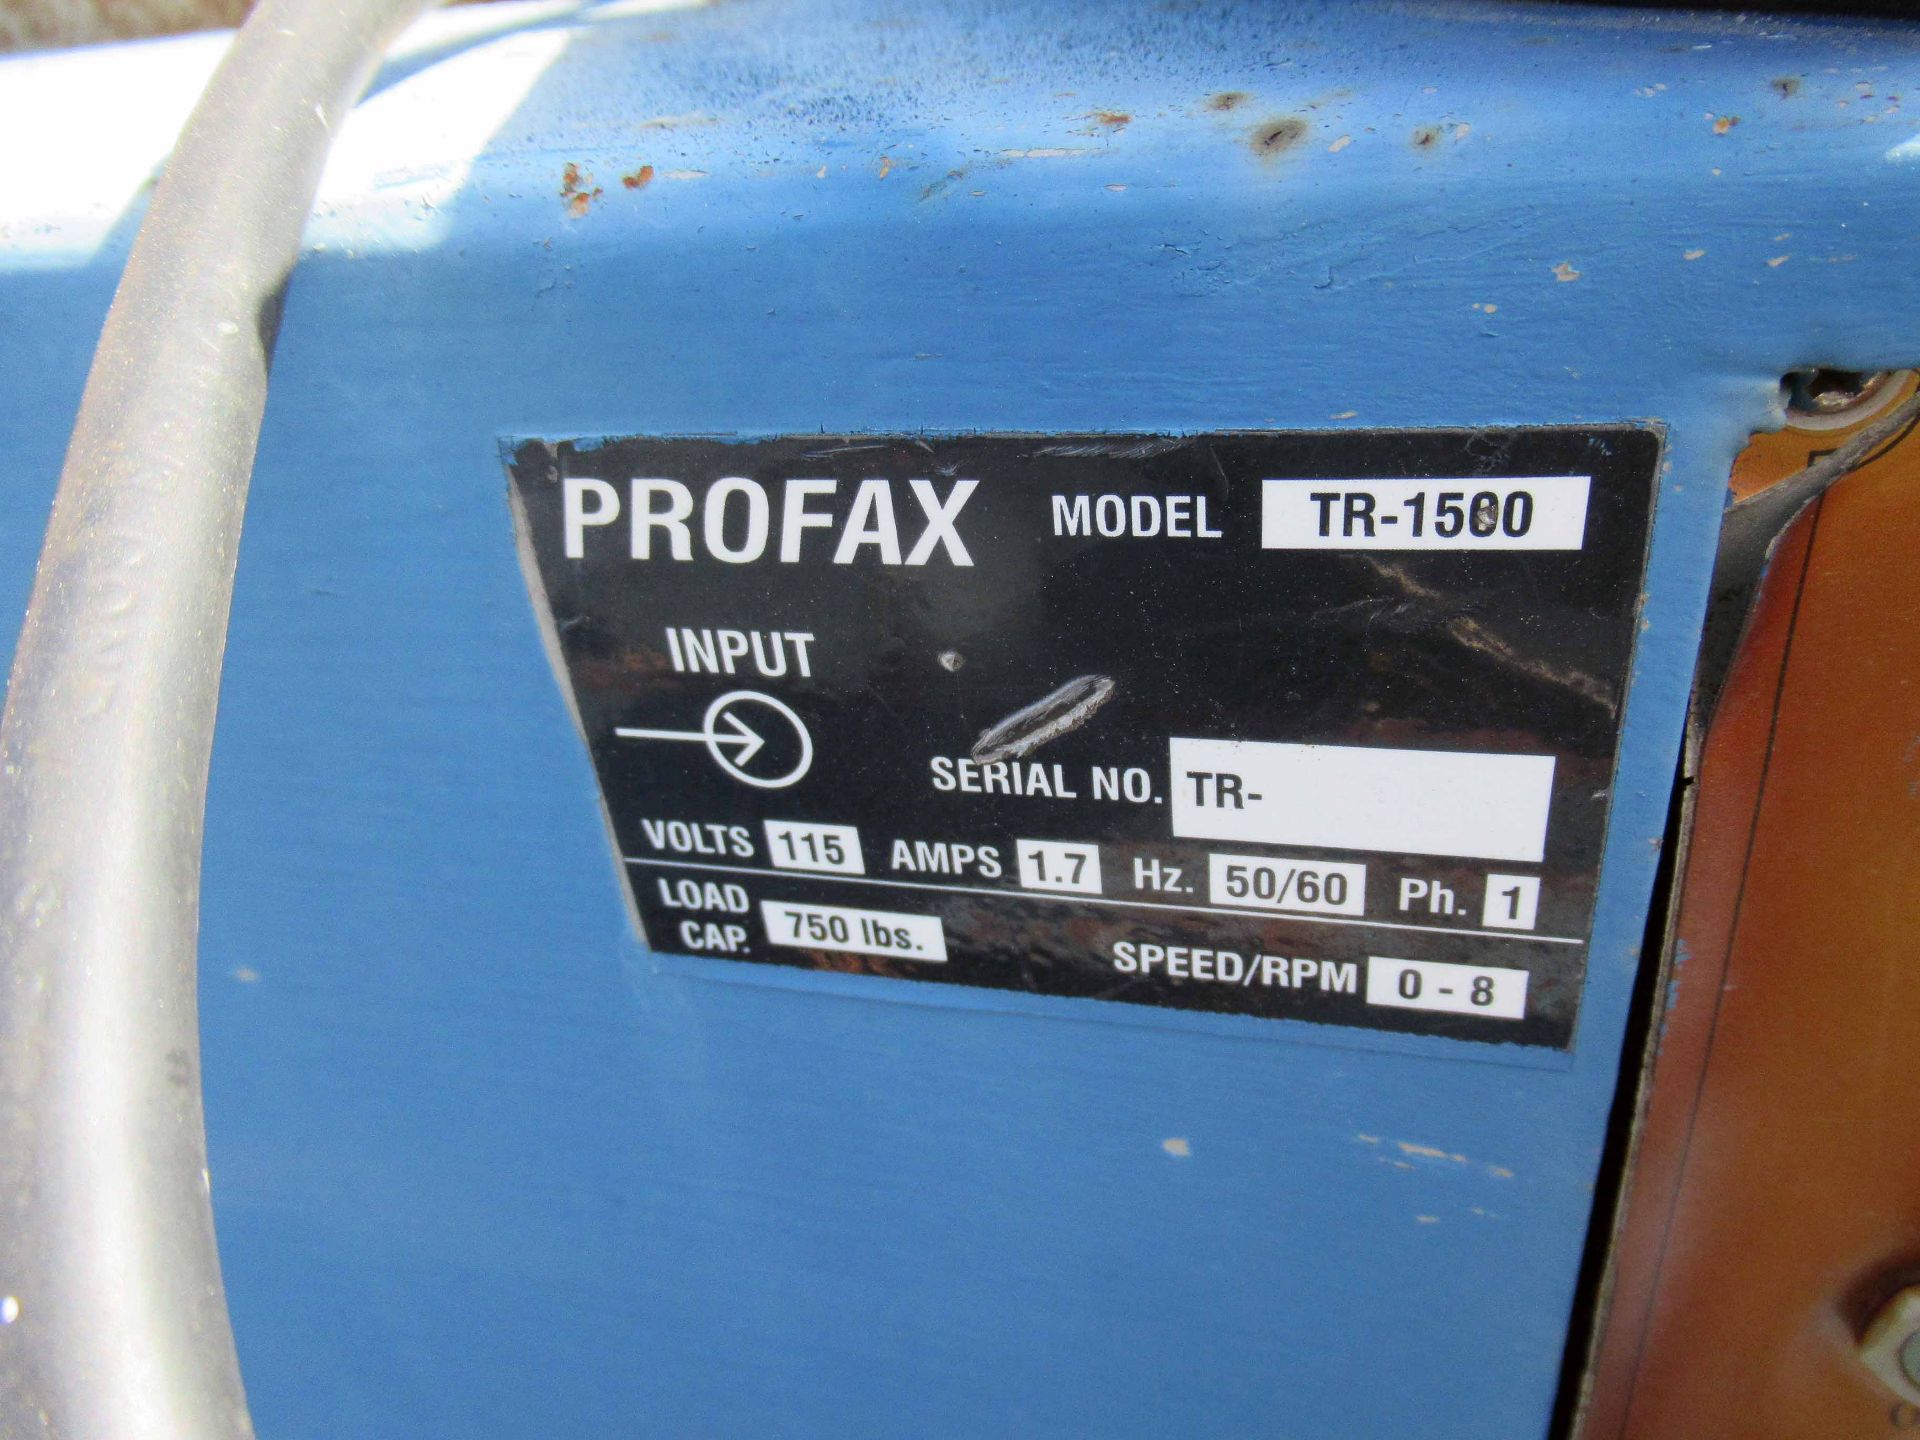 LOT OF TANK TURNING ROLLS (10 PLUS), PROFAX MDL. TR-1500, 750 lb. cap., variable speed, mounted on - Image 2 of 7